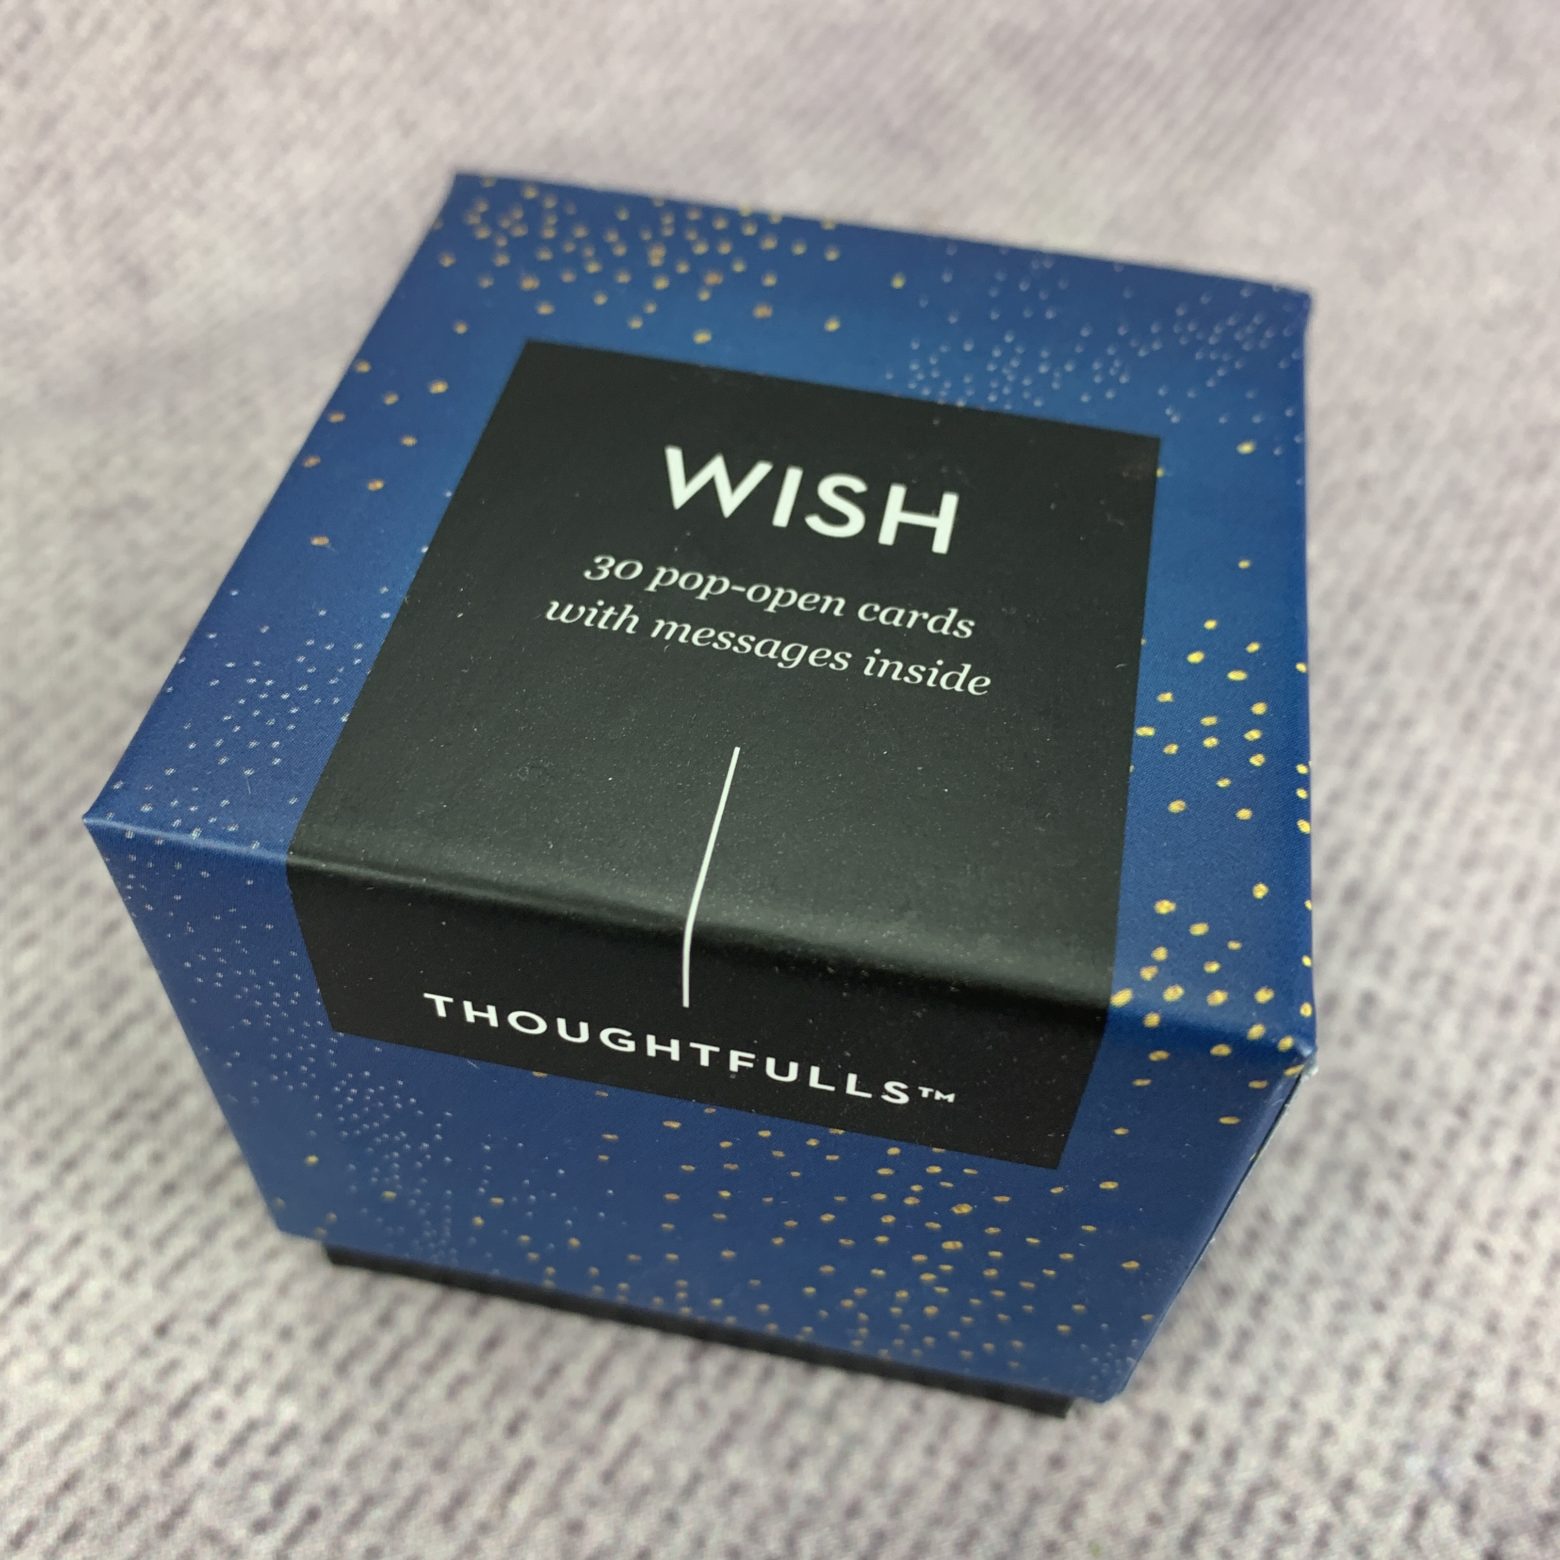 Wish - Thoughtfulls Box of Pop Open Cards